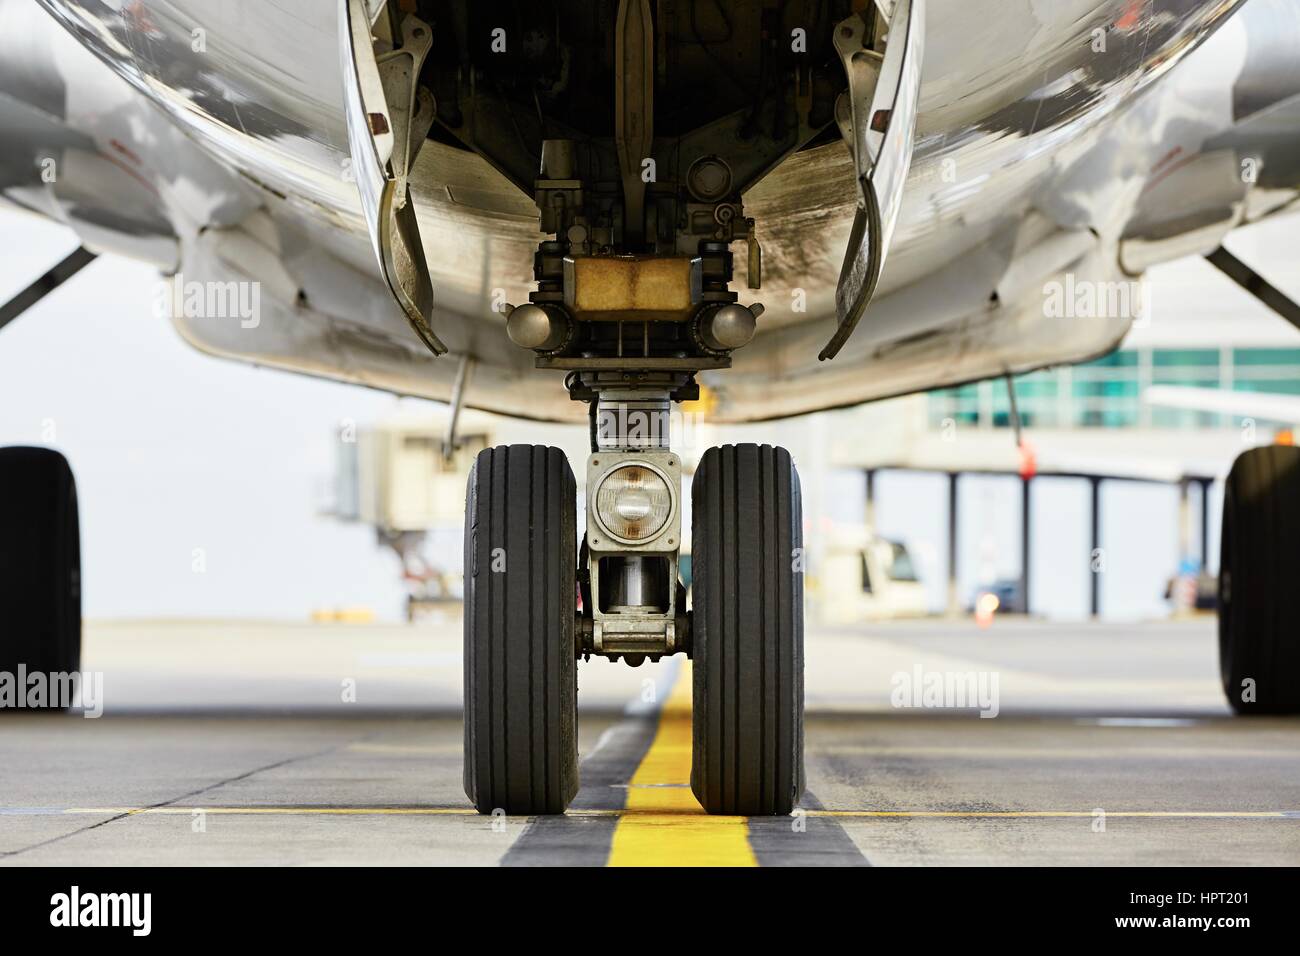 Airport - nose wheel of the aircraft Stock Photo